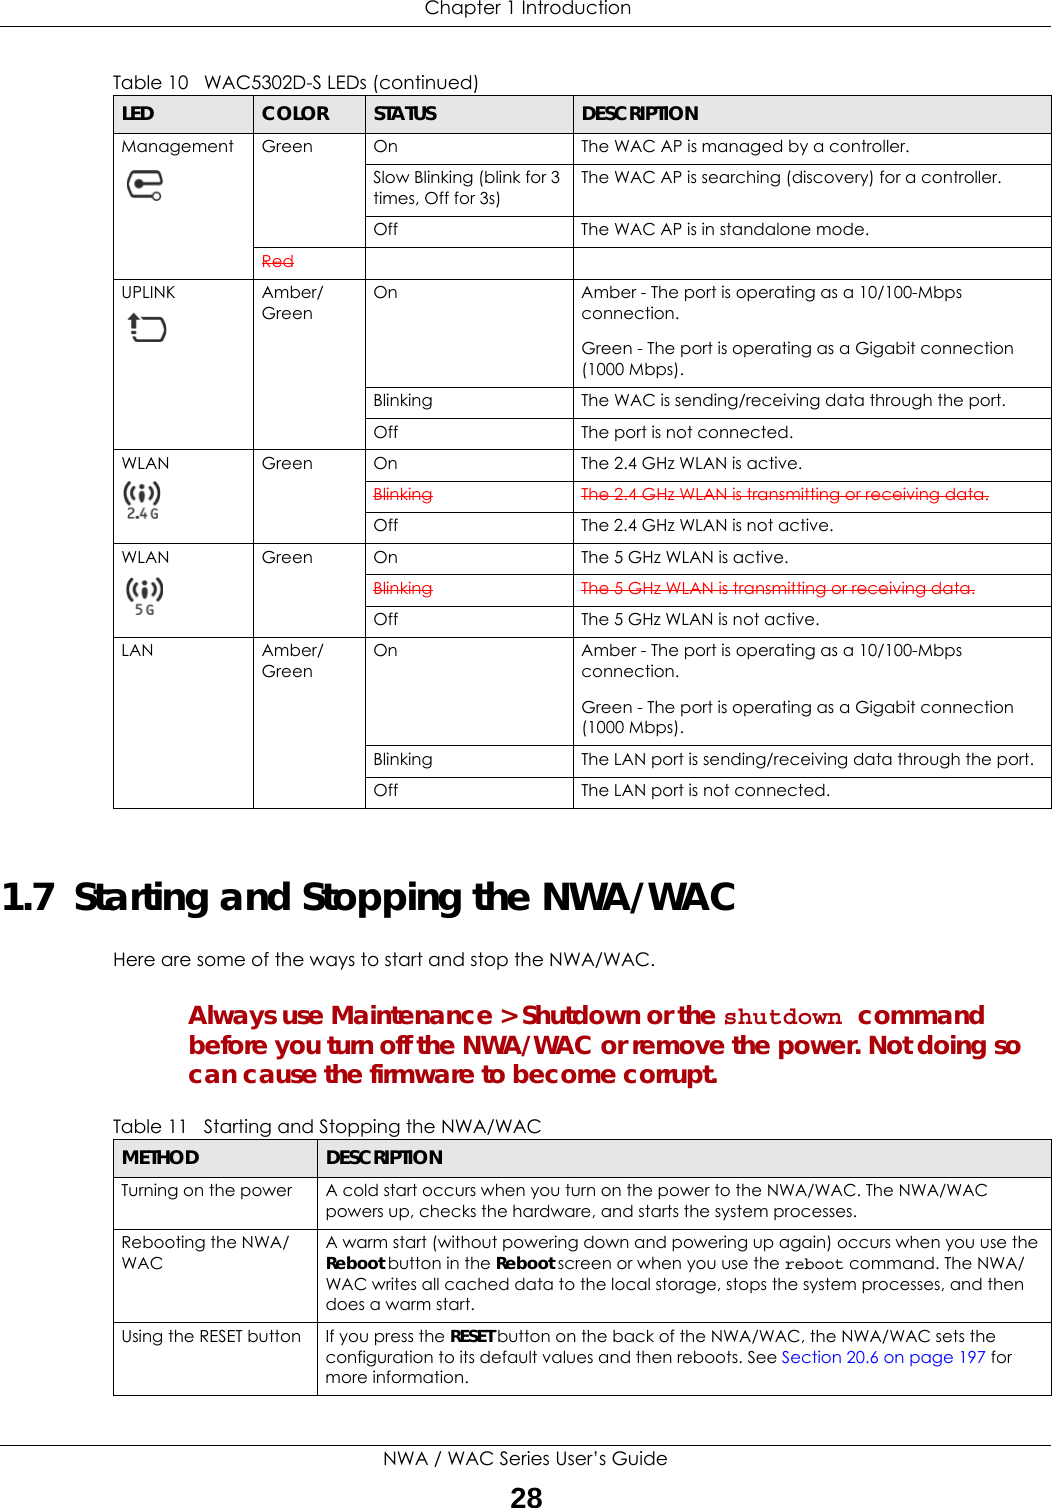  Chapter 1 IntroductionNWA / WAC Series User’s Guide281.7  Starting and Stopping the NWA/WACHere are some of the ways to start and stop the NWA/WAC.Always use Maintenance &gt; Shutdown or the shutdown command before you turn off the NWA/WAC or remove the power. Not doing so can cause the firmware to become corrupt. Management Green On The WAC AP is managed by a controller.Slow Blinking (blink for 3 times, Off for 3s)The WAC AP is searching (discovery) for a controller.Off The WAC AP is in standalone mode.RedUPLINK Amber/GreenOn Amber - The port is operating as a 10/100-Mbps connection.Green - The port is operating as a Gigabit connection (1000 Mbps).Blinking The WAC is sending/receiving data through the port.Off The port is not connected.WLAN Green On The 2.4 GHz WLAN is active.Blinking The 2.4 GHz WLAN is transmitting or receiving data.Off The 2.4 GHz WLAN is not active.WLAN Green On The 5 GHz WLAN is active.Blinking The 5 GHz WLAN is transmitting or receiving data.Off The 5 GHz WLAN is not active.LAN Amber/GreenOn Amber - The port is operating as a 10/100-Mbps connection.Green - The port is operating as a Gigabit connection (1000 Mbps).Blinking The LAN port is sending/receiving data through the port.Off The LAN port is not connected.Table 10   WAC5302D-S LEDs (continued)LED COLOR STATUS DESCRIPTIONTable 11   Starting and Stopping the NWA/WACMETHOD DESCRIPTIONTurning on the power A cold start occurs when you turn on the power to the NWA/WAC. The NWA/WAC powers up, checks the hardware, and starts the system processes.Rebooting the NWA/WACA warm start (without powering down and powering up again) occurs when you use the Reboot button in the Reboot screen or when you use the reboot command. The NWA/WAC writes all cached data to the local storage, stops the system processes, and then does a warm start. Using the RESET button If you press the RESET button on the back of the NWA/WAC, the NWA/WAC sets the configuration to its default values and then reboots. See Section 20.6 on page 197 for more information.